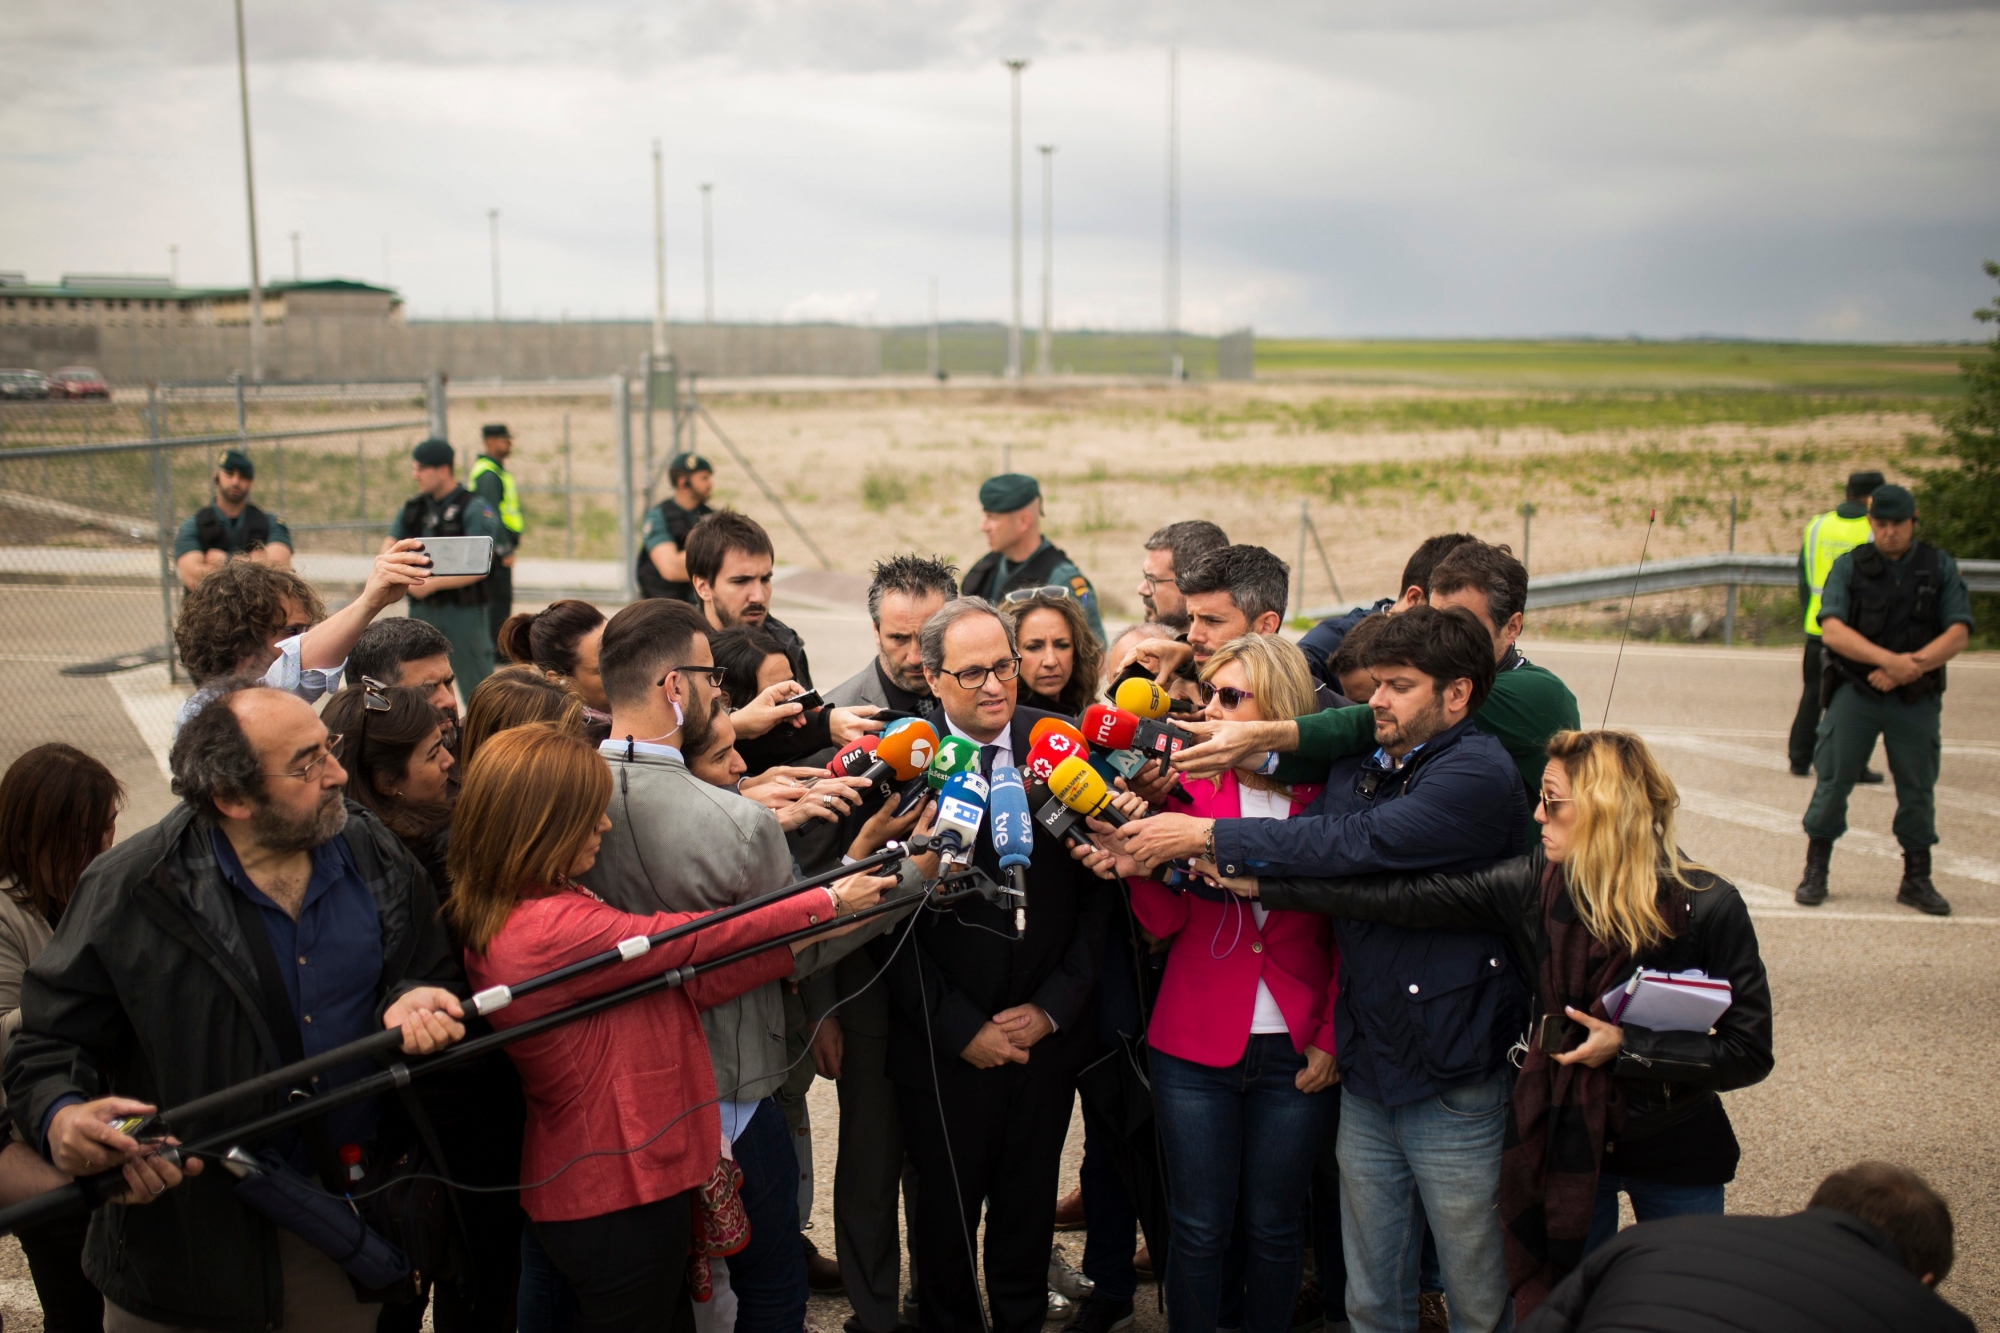 Newly elected regional Catalan President Quim Torra, center, makes a statement to the media after visiting jailed Catalan politicians at the Estremera prison, near Madrid, Monday, May 21, 2018. New Catalan leader Quim Torra named Jordi Turull and Josep Rull, who are both in pre-trial detention, and Antoni Comin and Lluis Puig, who are fugitives in Belgium, as proposed members of his government on Saturday. (AP Photo/Francisco Seco) Spain Catalonia